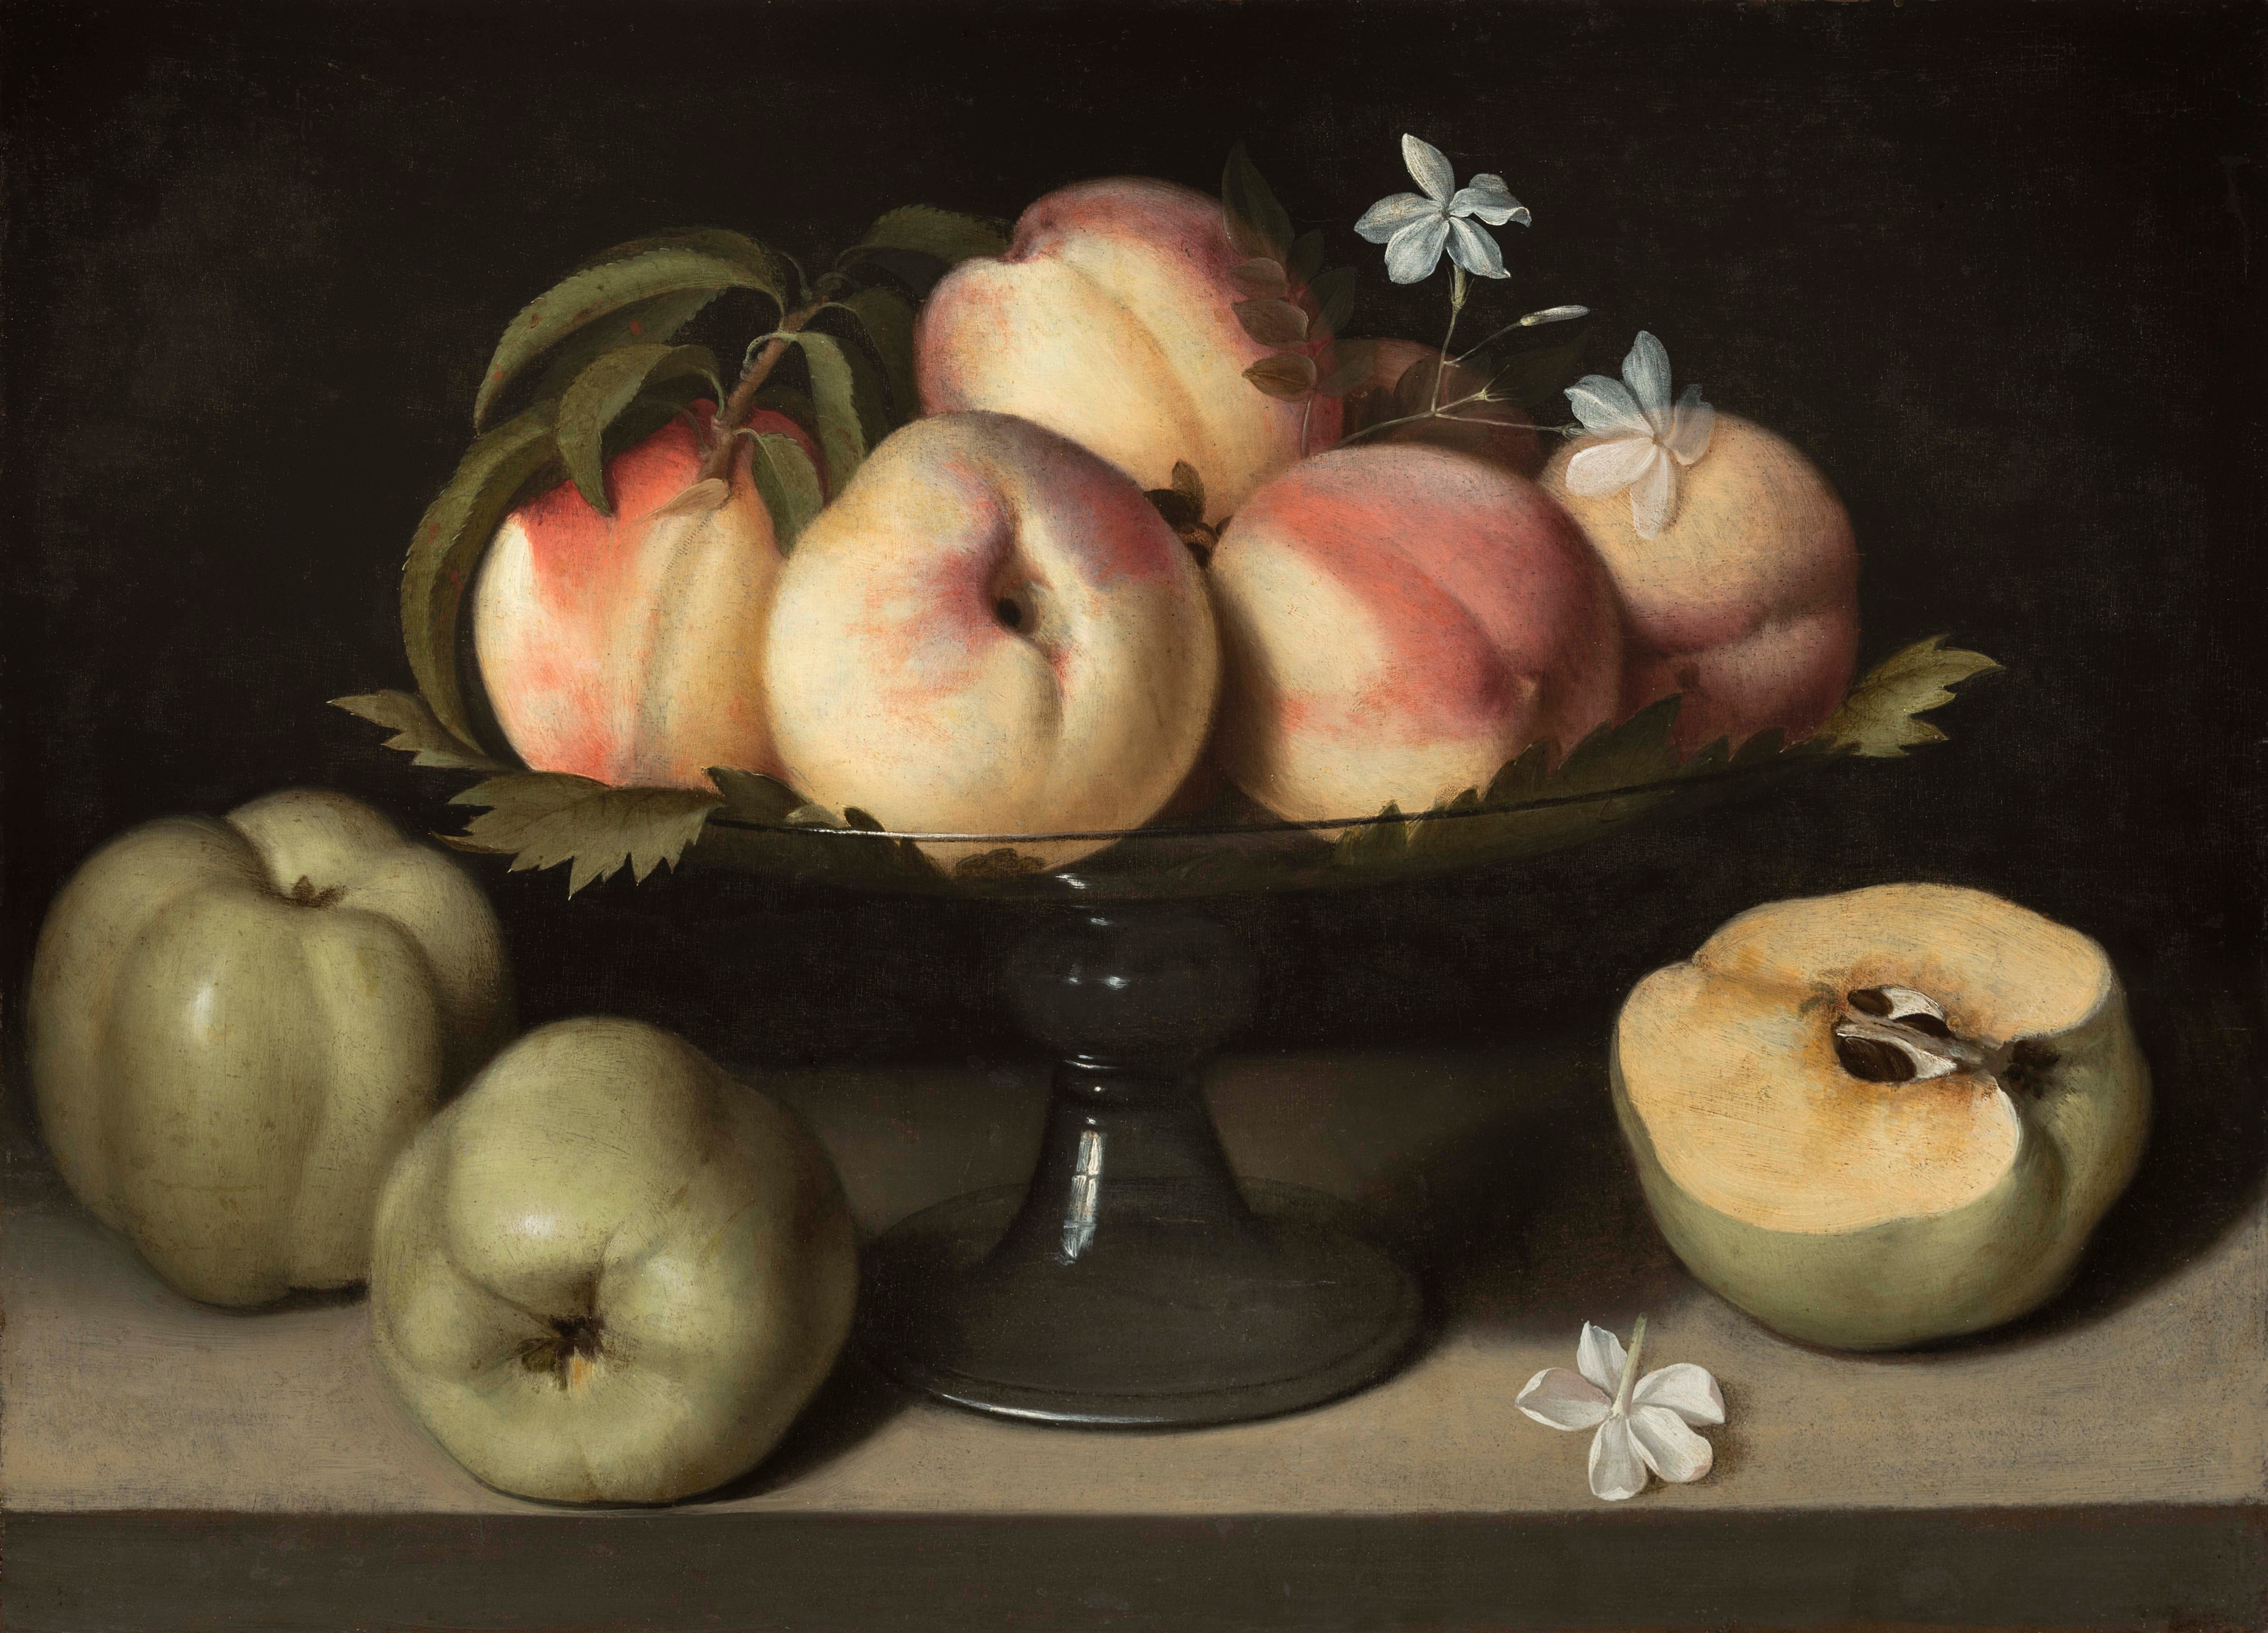 Fede Galizia, :Glass Tazza with Peaches, Jasmine Flowers and Apples," 1607, oil on panel. Montreal Museum of Fine Arts, Gift of Mr. and Mrs. Michal Hornstein, 2015.19